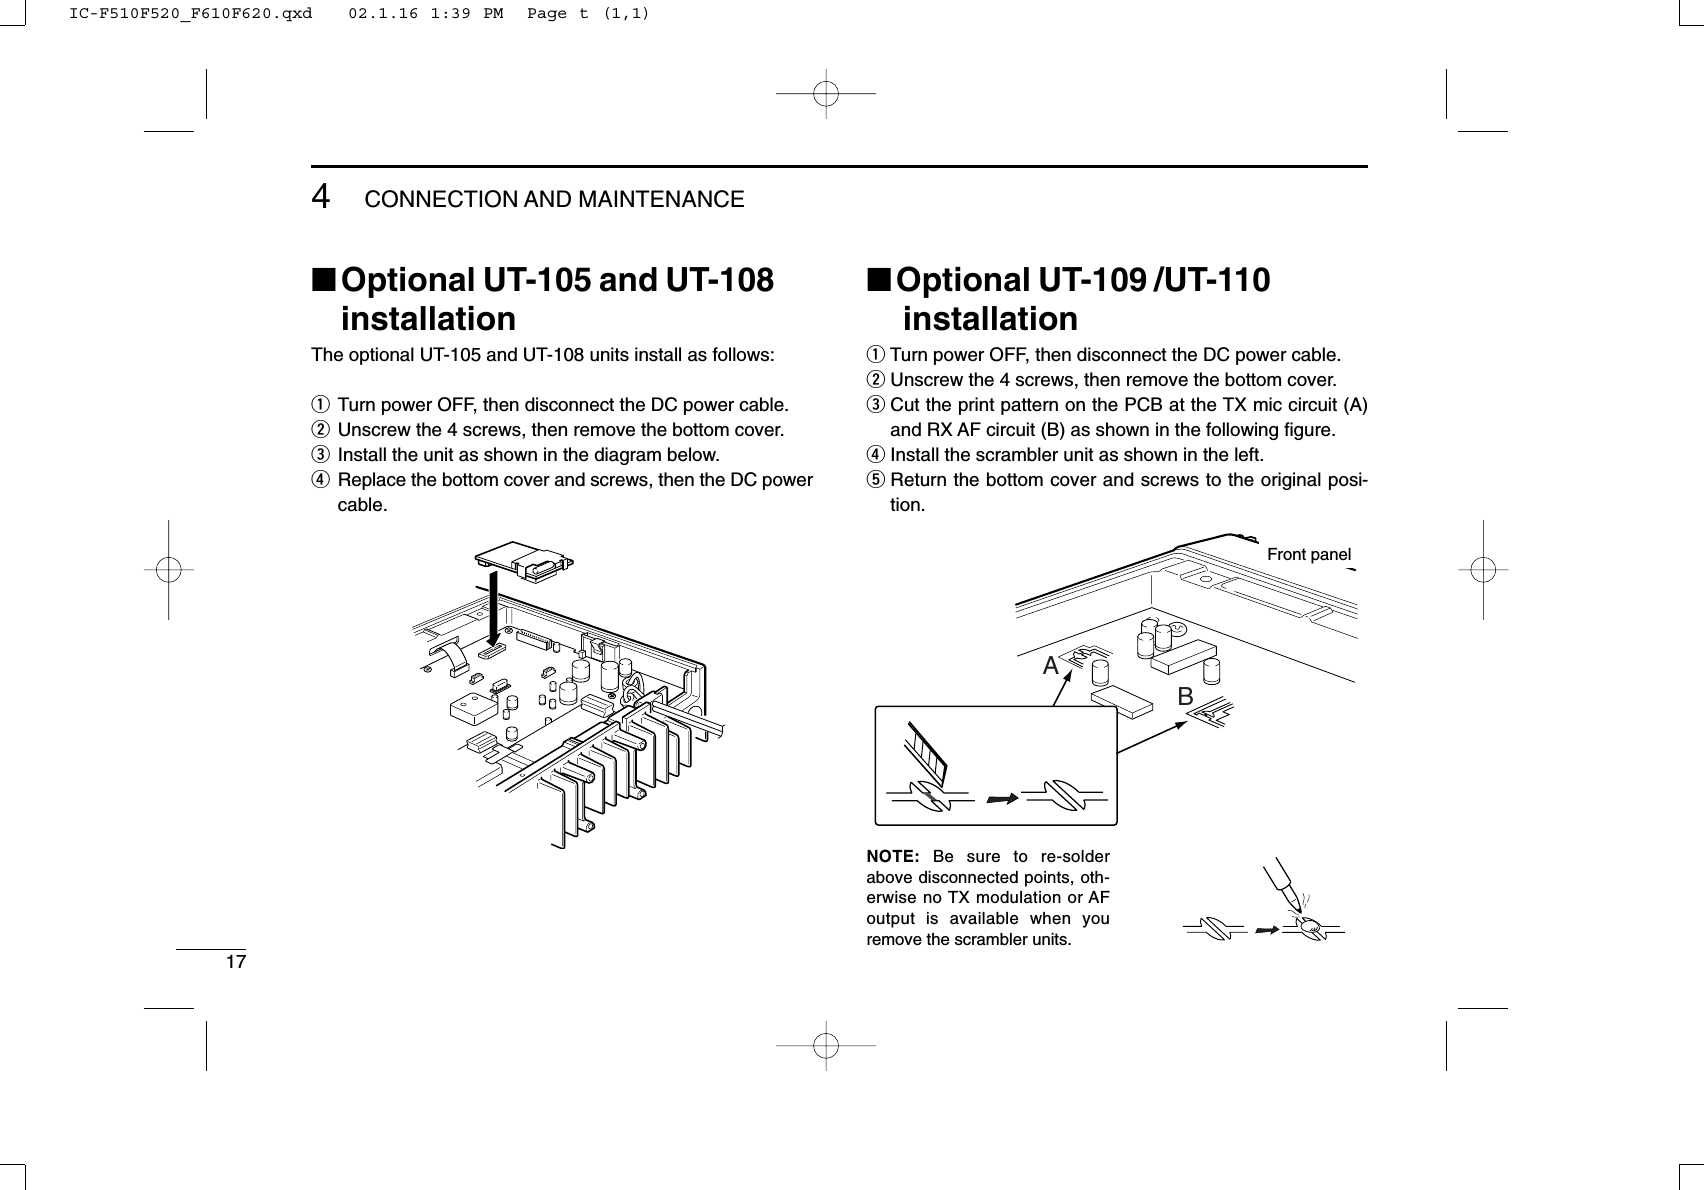 174CONNECTION AND MAINTENANCE■Optional UT-105 and UT-108installationThe optional UT-105 and UT-108 units install as follows:qTurn power OFF, then disconnect the DC power cable.wUnscrew the 4 screws, then remove the bottom cover.eInstall the unit as shown in the diagram below.rReplace the bottom cover and screws, then the DC powercable.■Optional UT-109 /UT-110installationqTurn power OFF, then disconnect the DC power cable.wUnscrew the 4 screws, then remove the bottom cover.eCut the print pattern on the PCB at the TX mic circuit (A)and RX AF circuit (B) as shown in the following ﬁgure.rInstall the scrambler unit as shown in the left.tReturn the bottom cover and screws to the original posi-tion.NOTE: Be sure to re-solderabove disconnected points, oth-erwise no TX modulation or AFoutput is available when youremove the scrambler units.ABFront panelIC-F510F520_F610F620.qxd   02.1.16 1:39 PM  Page t (1,1)